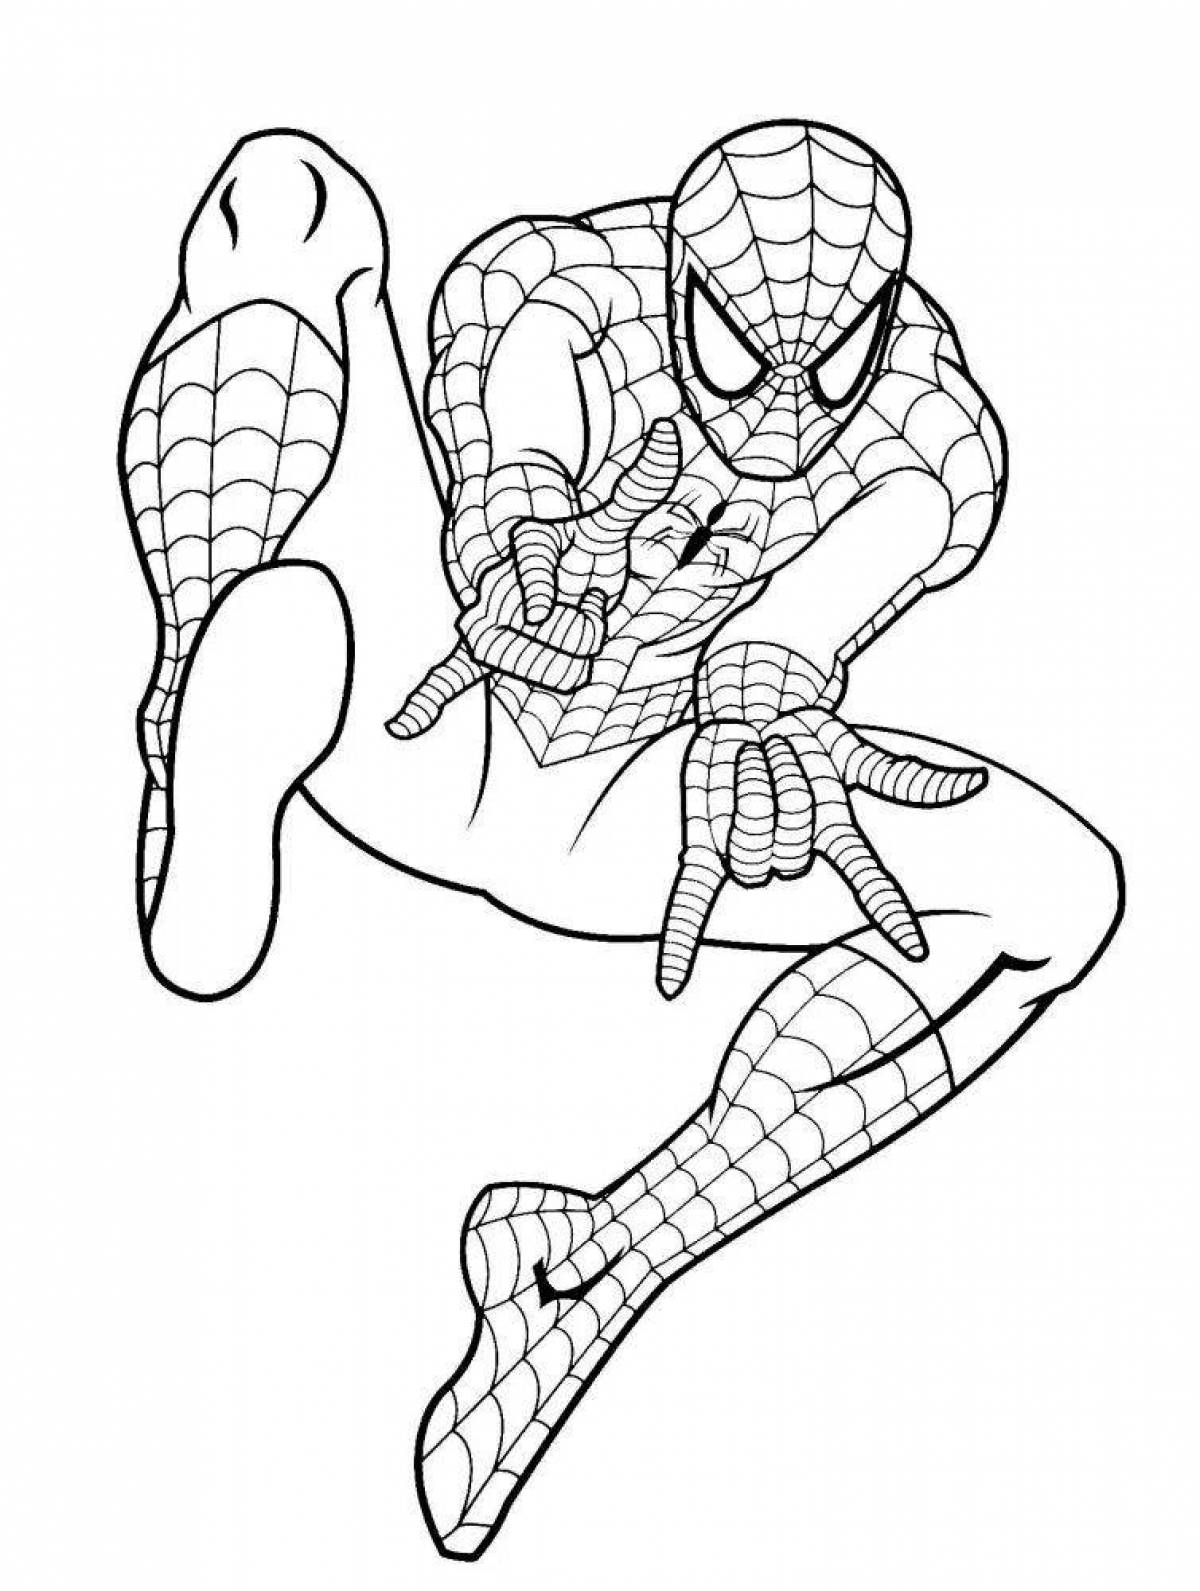 Mysterious spider-man coloring page